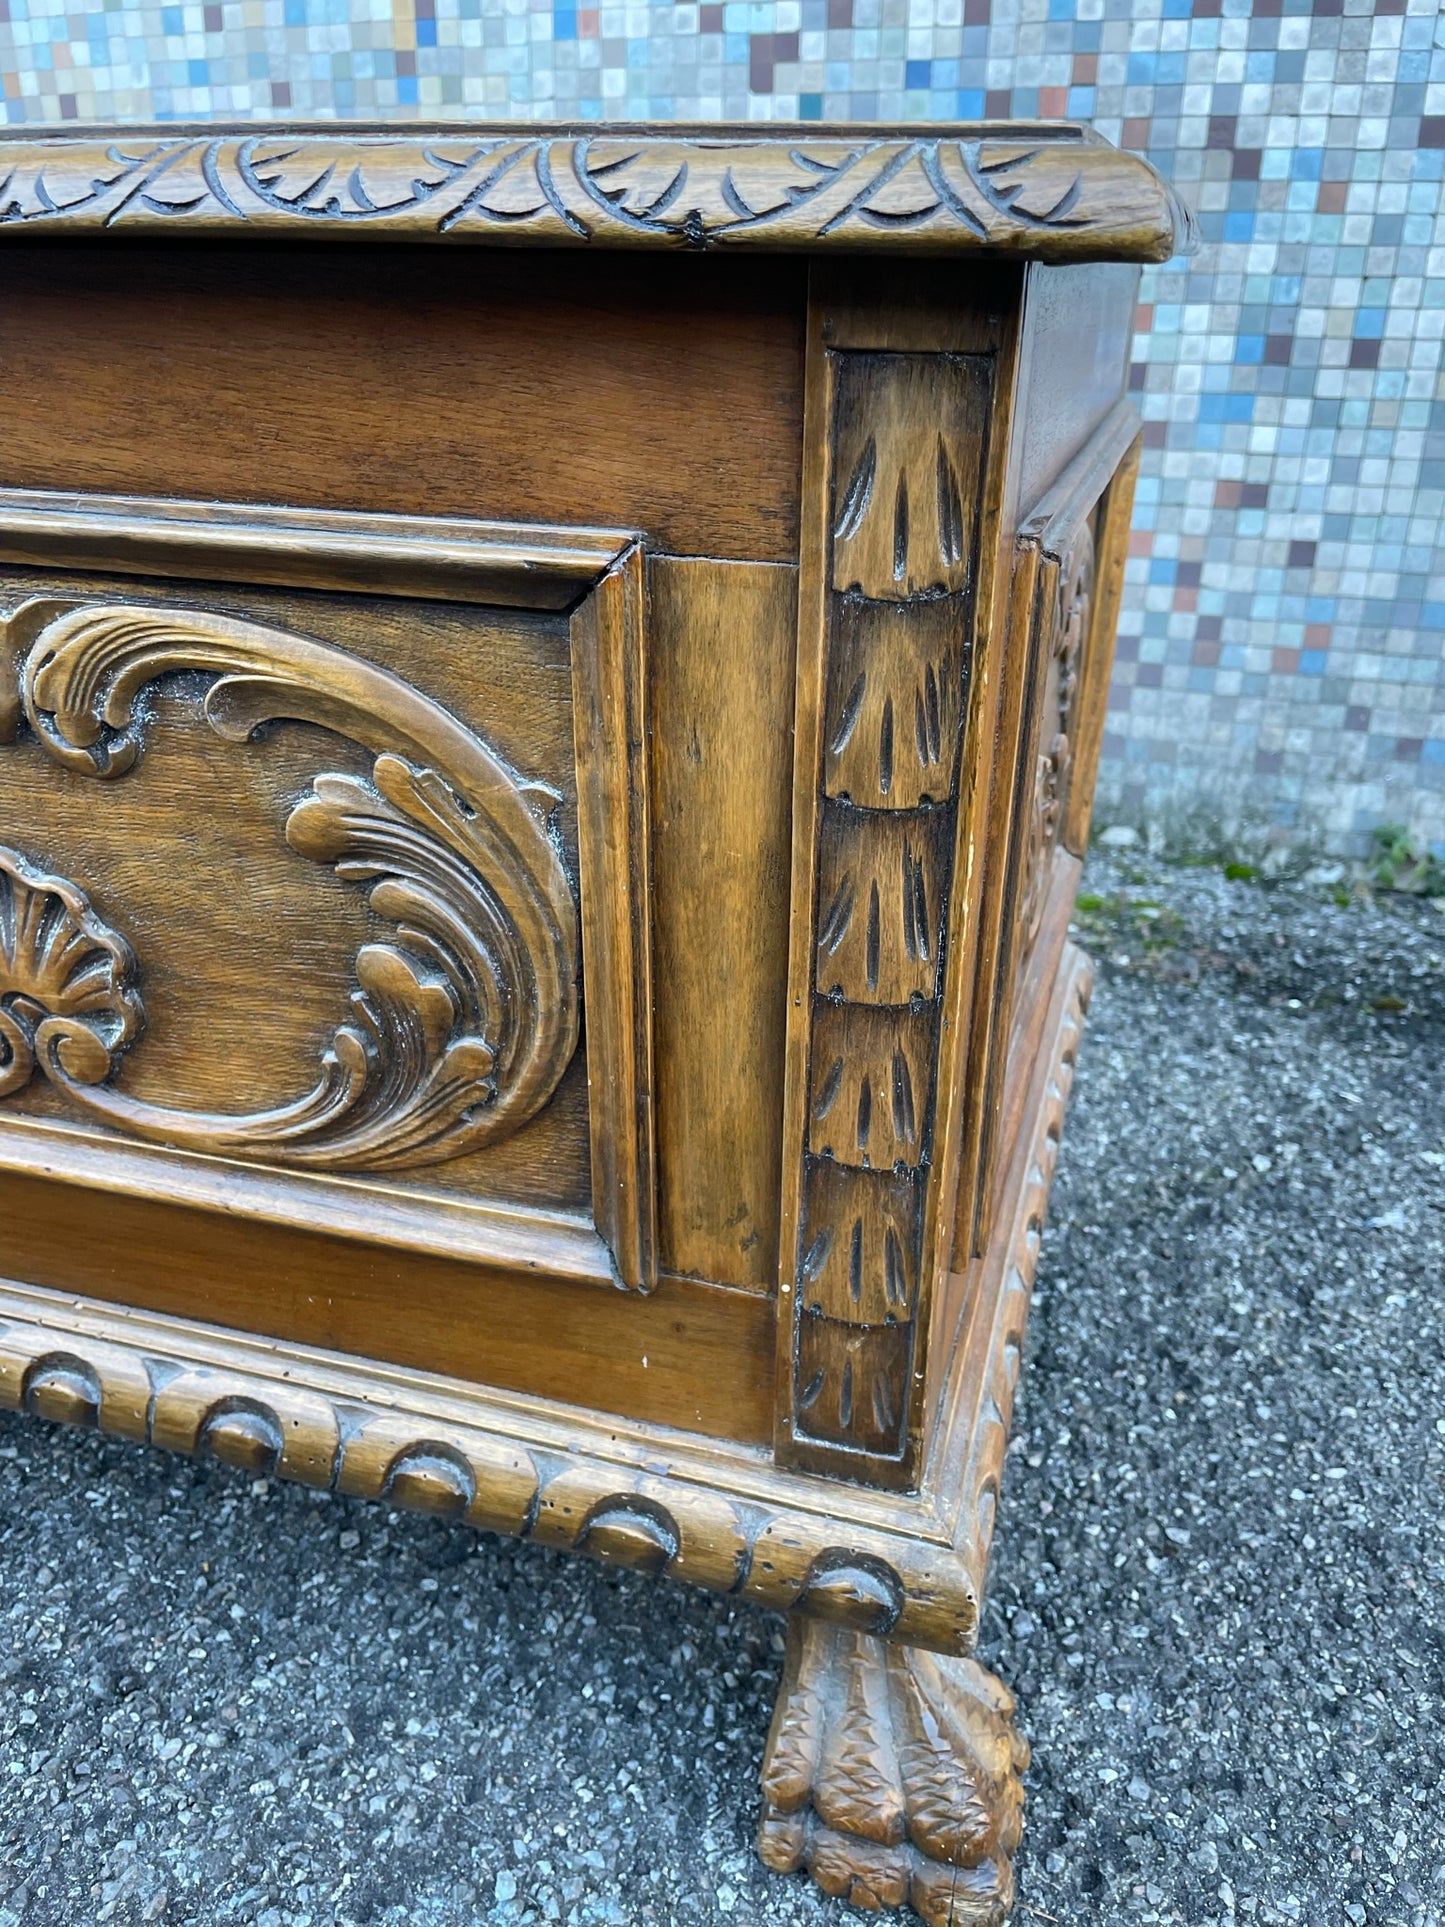 Wooden chest with lion's feet